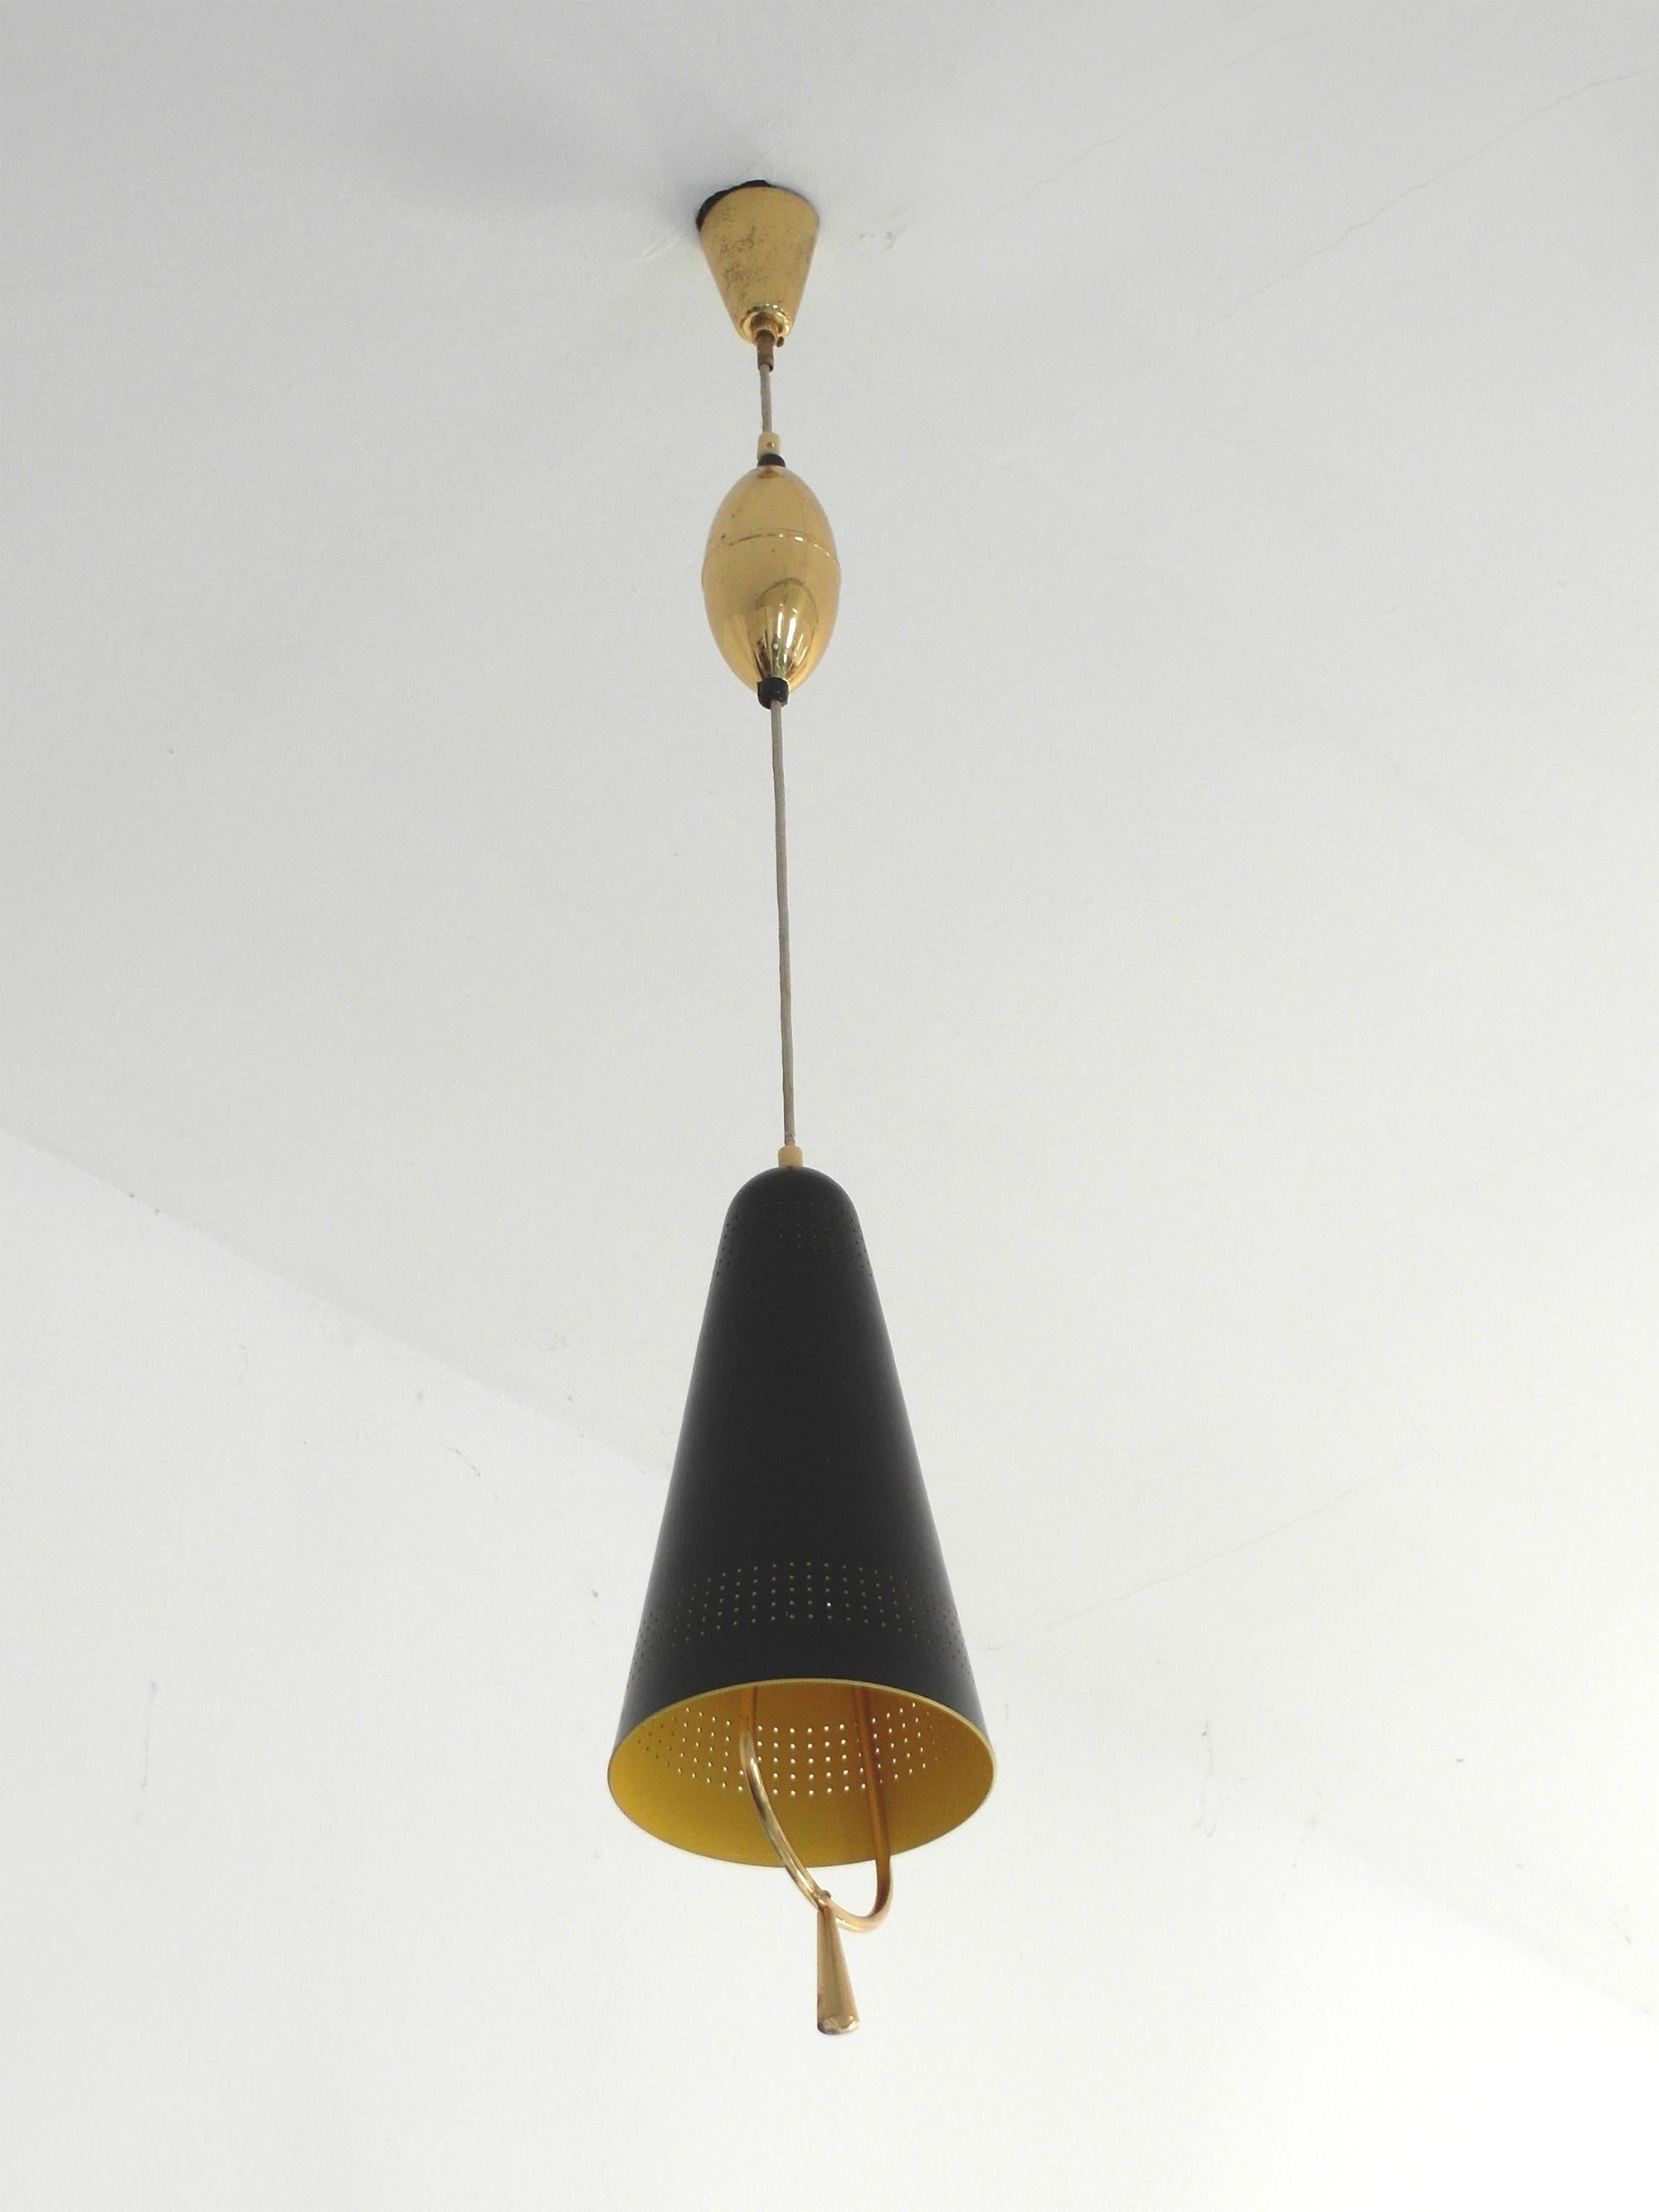 An adjustable Scandinavian modern pendel pendant light, Finland 1940s-1950s. This well-kept metal pendant light features resemblances with some of Paavo Tynell's early designs, but is not documented and has no trademarks.
It features a heavy